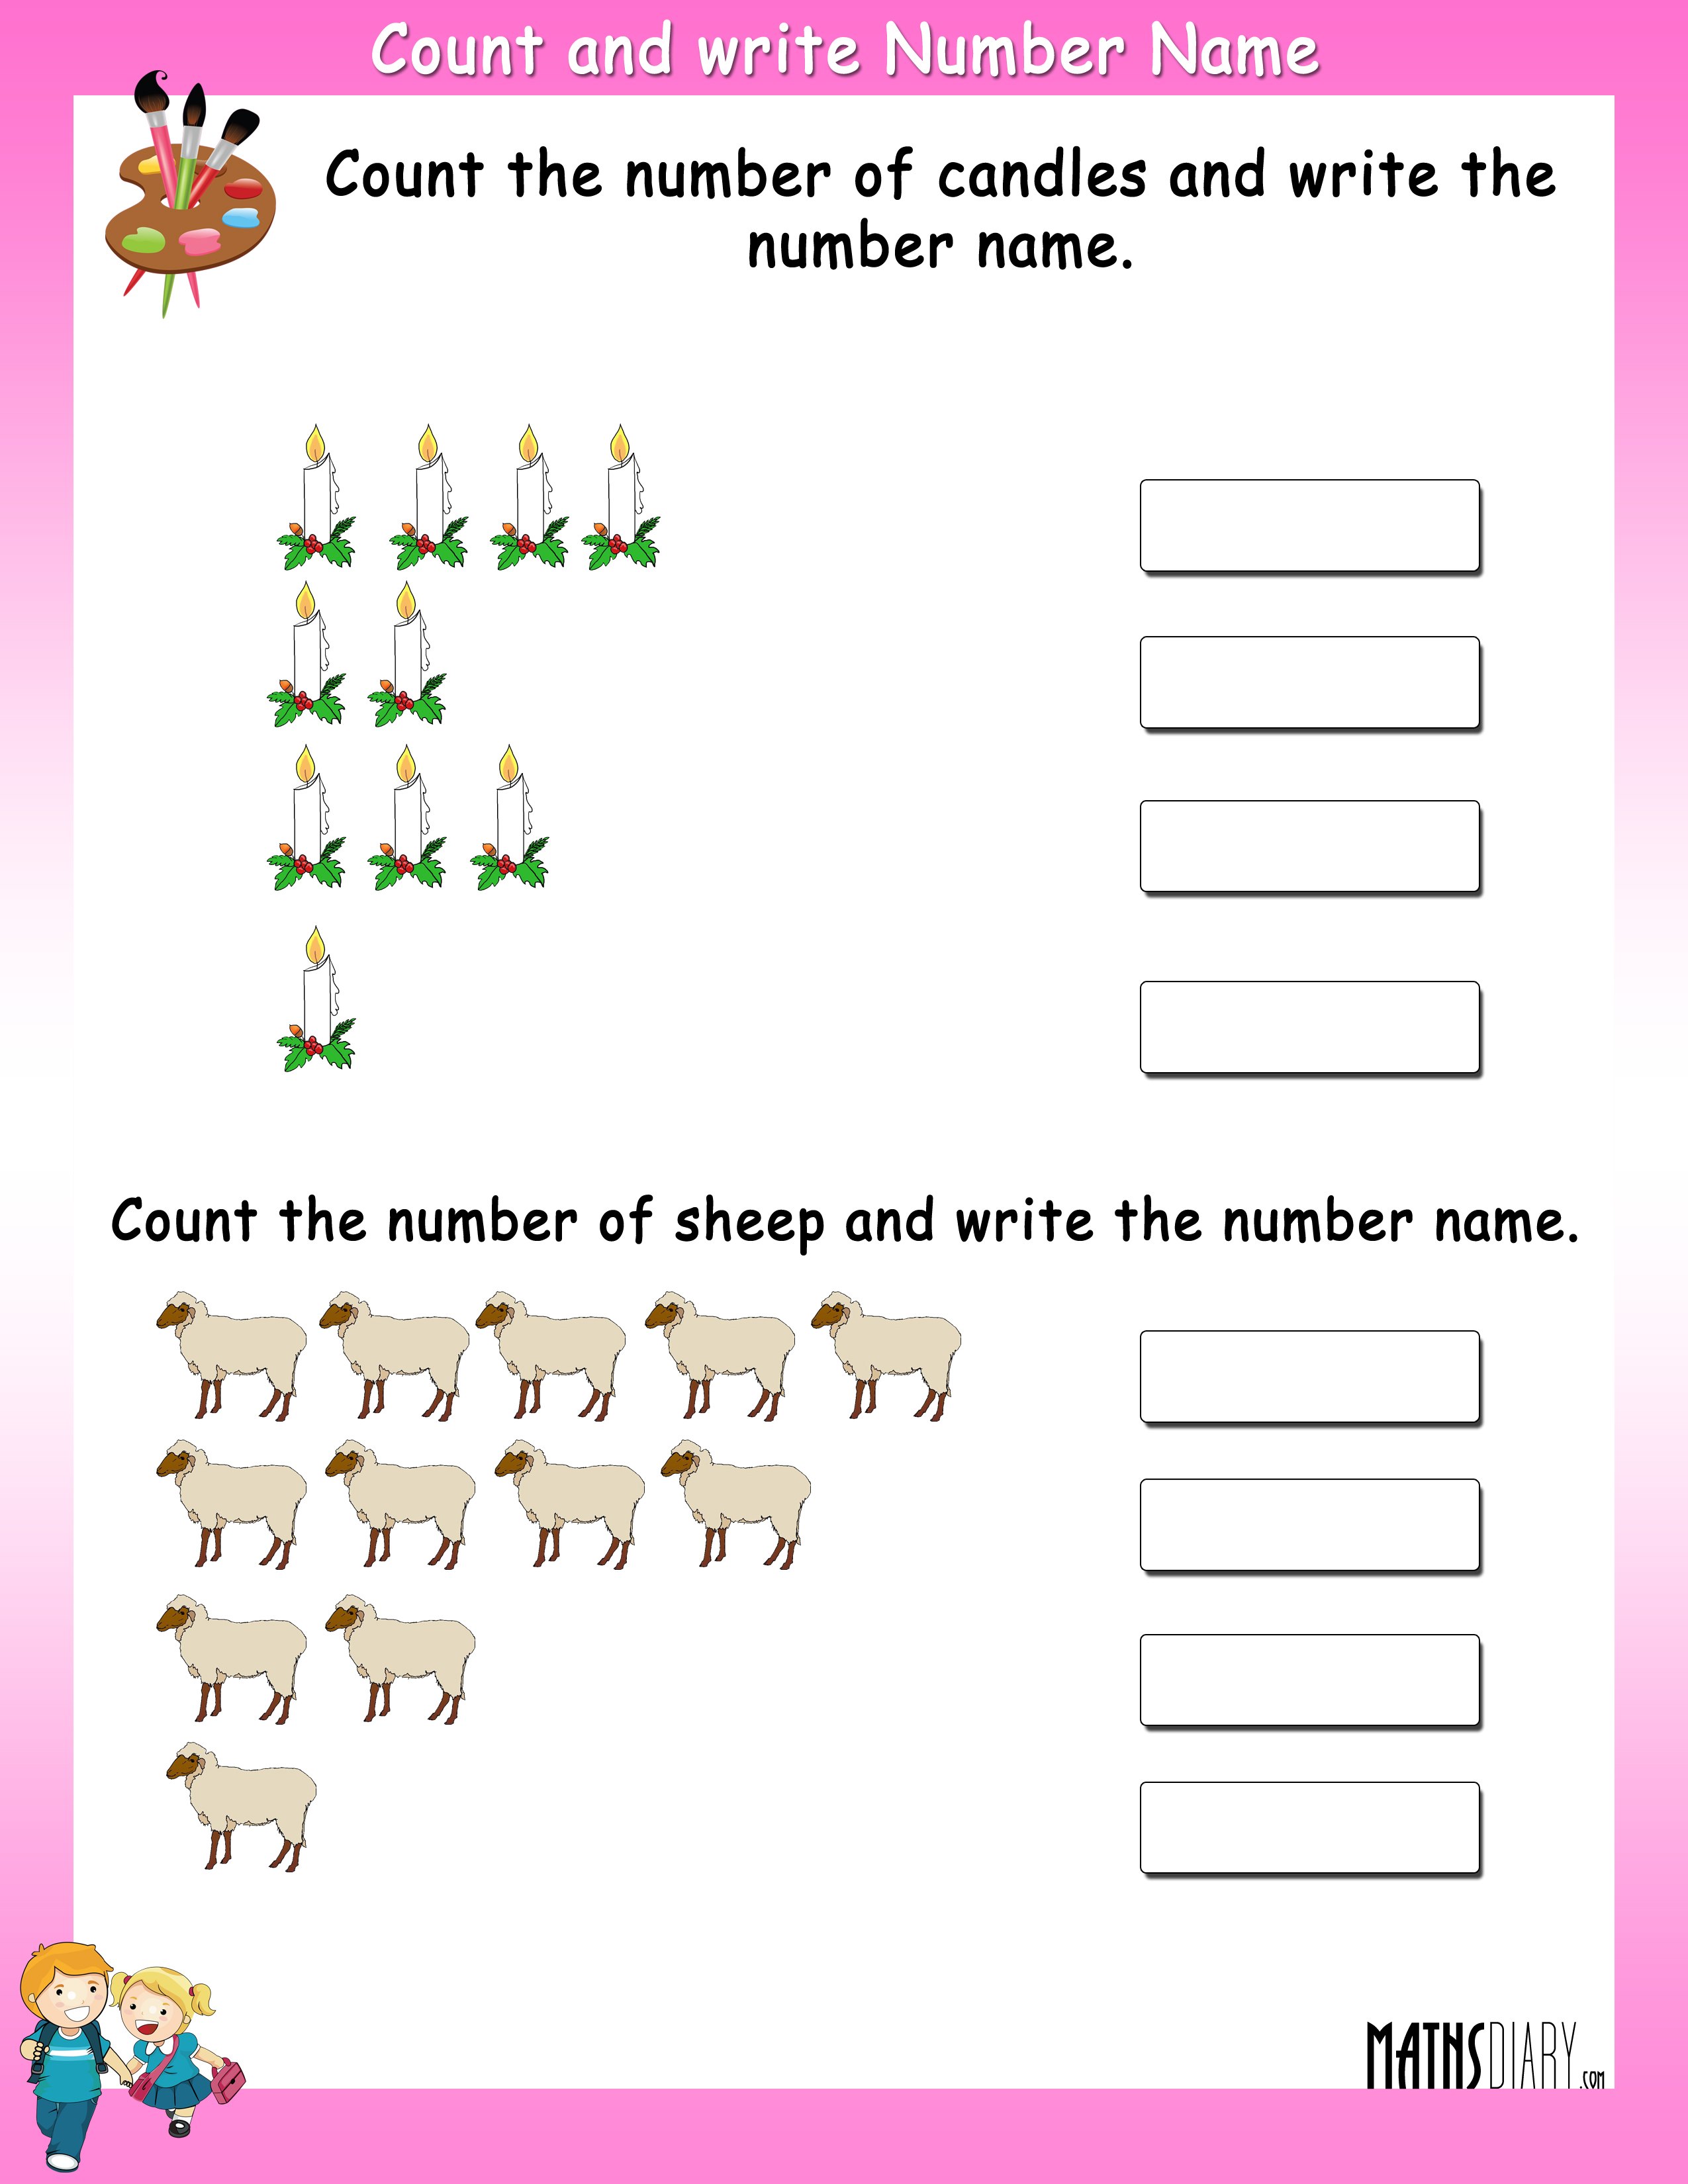 Number Names Worksheet For Class 6